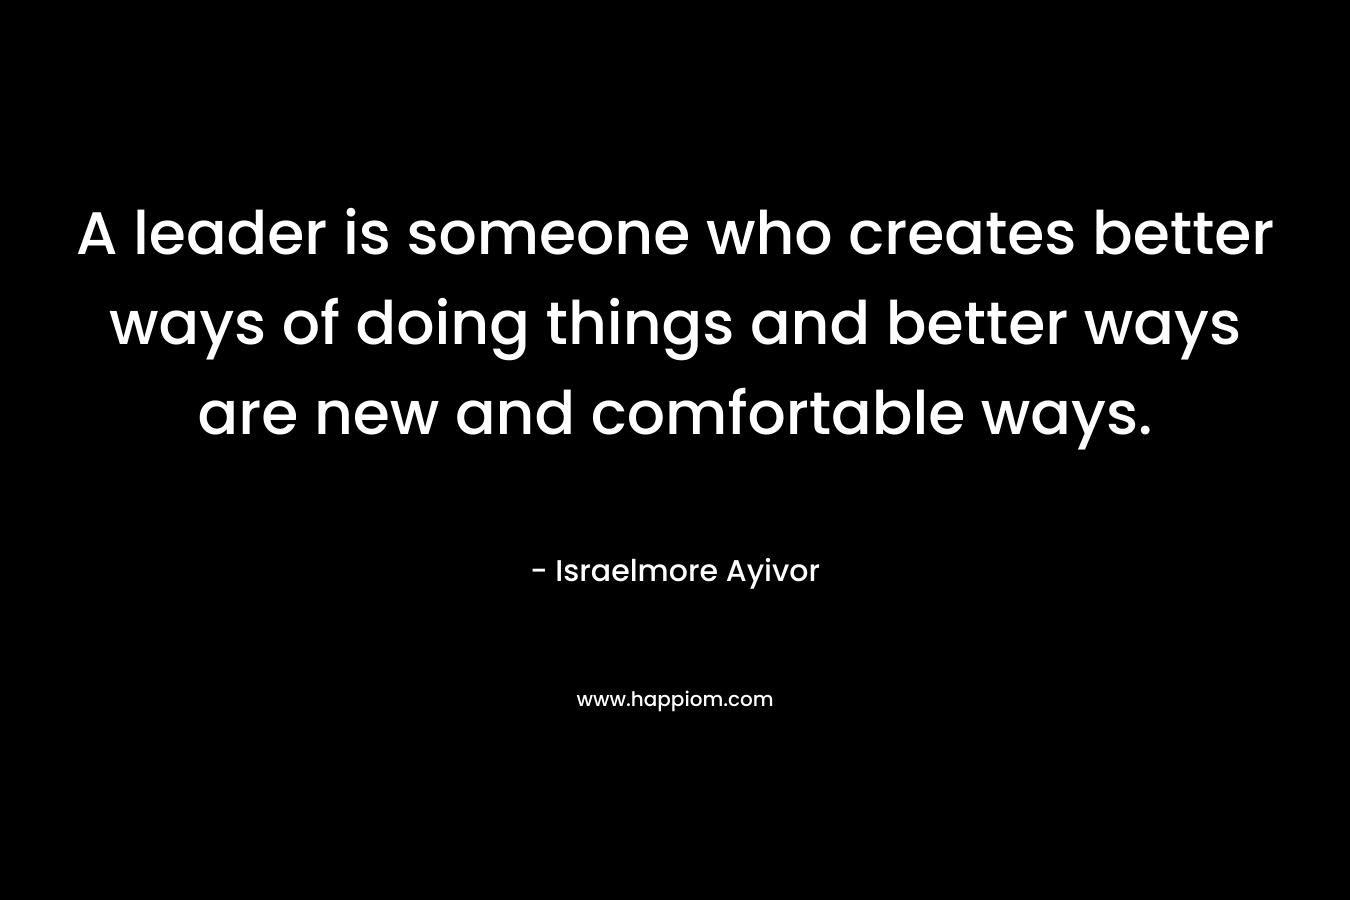 A leader is someone who creates better ways of doing things and better ways are new and comfortable ways.